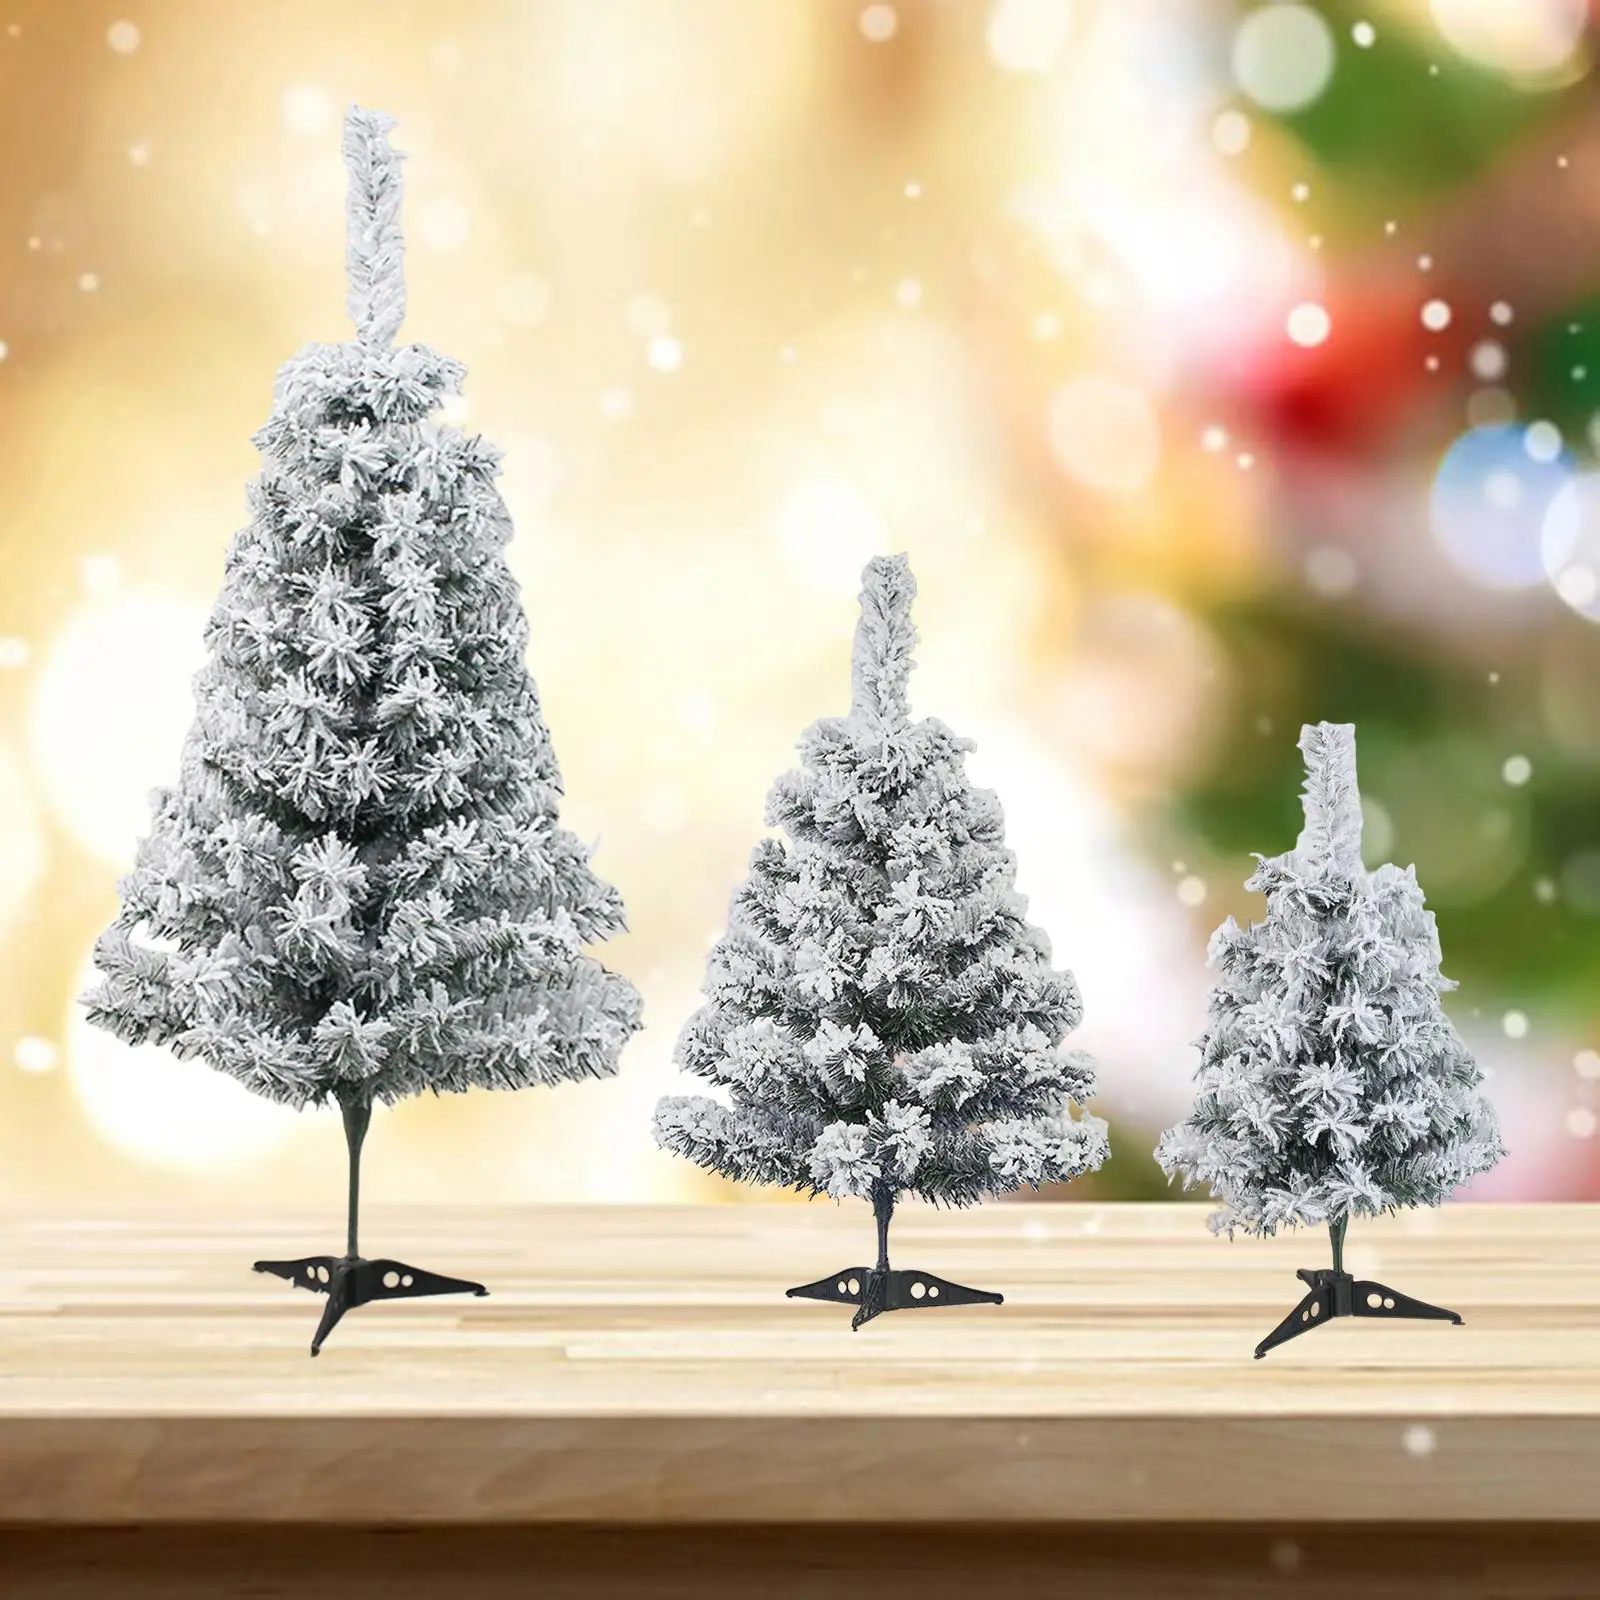 Desk Artificial Christmas Tree Snowy Downswept Photo Prop Decor Flocked Xmas Tree for Shopping Center Yard Office Home Entrance